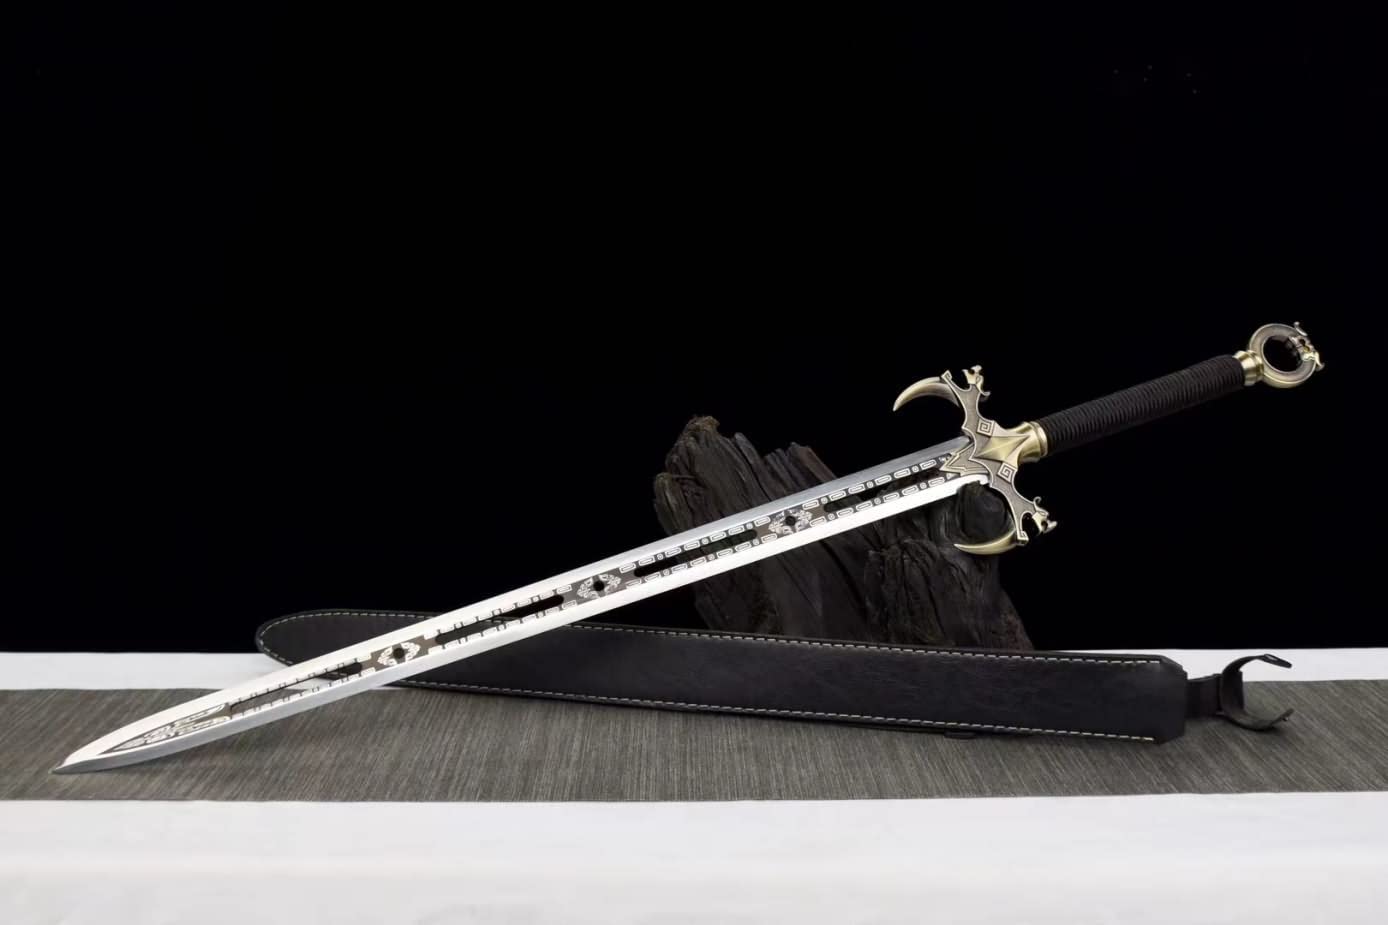 Knight Swords,Forged Hadifield Steel Etch Blade,Alloy Fittings,Fake Leather Scabbard,chinese sword